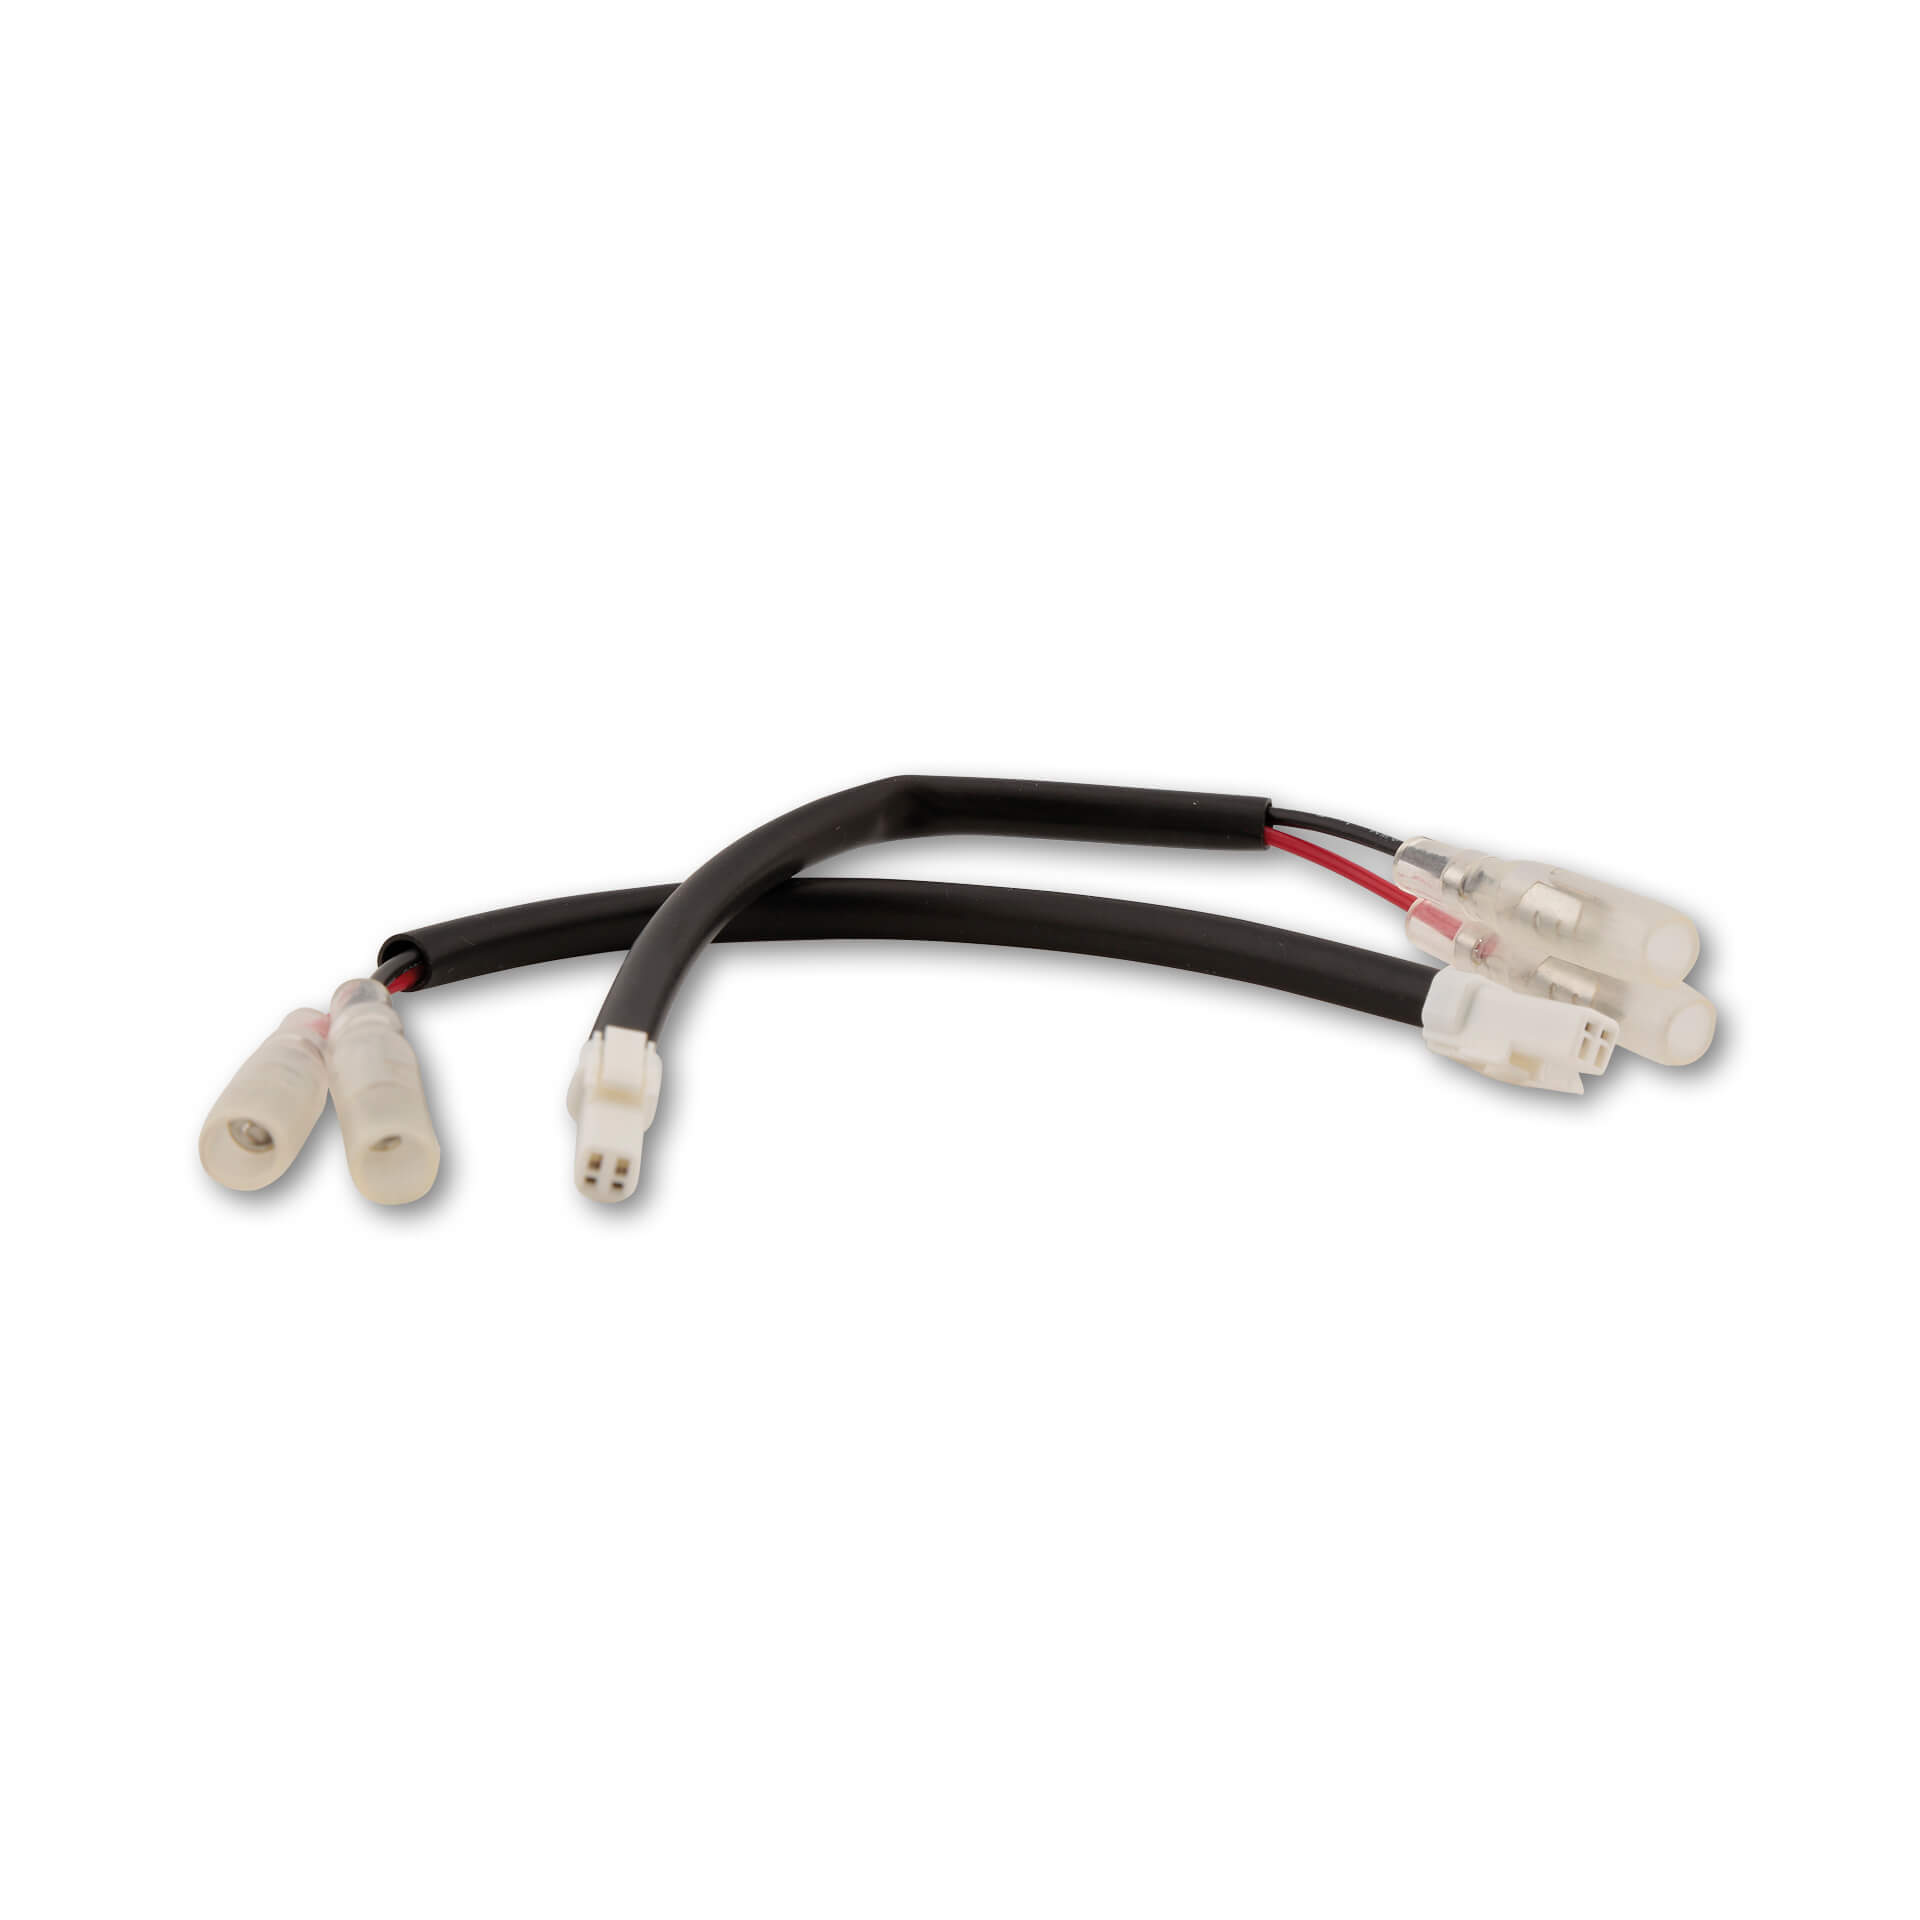 highsider Adapter cable for mini turn signals, MV Agusta, Ducati + KTM